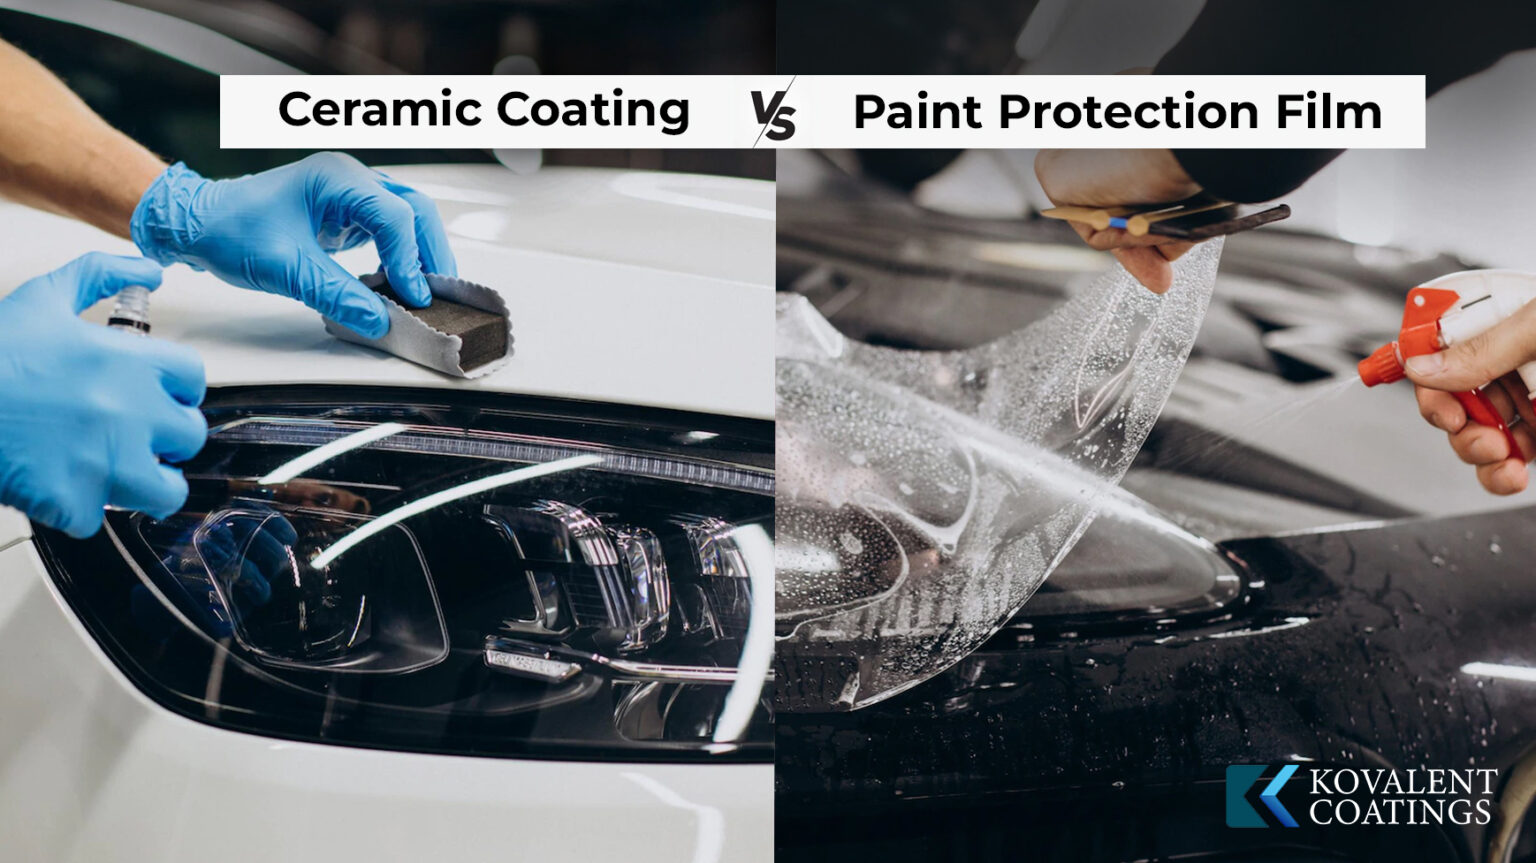 How to apply ceramic coatings over paint protection films